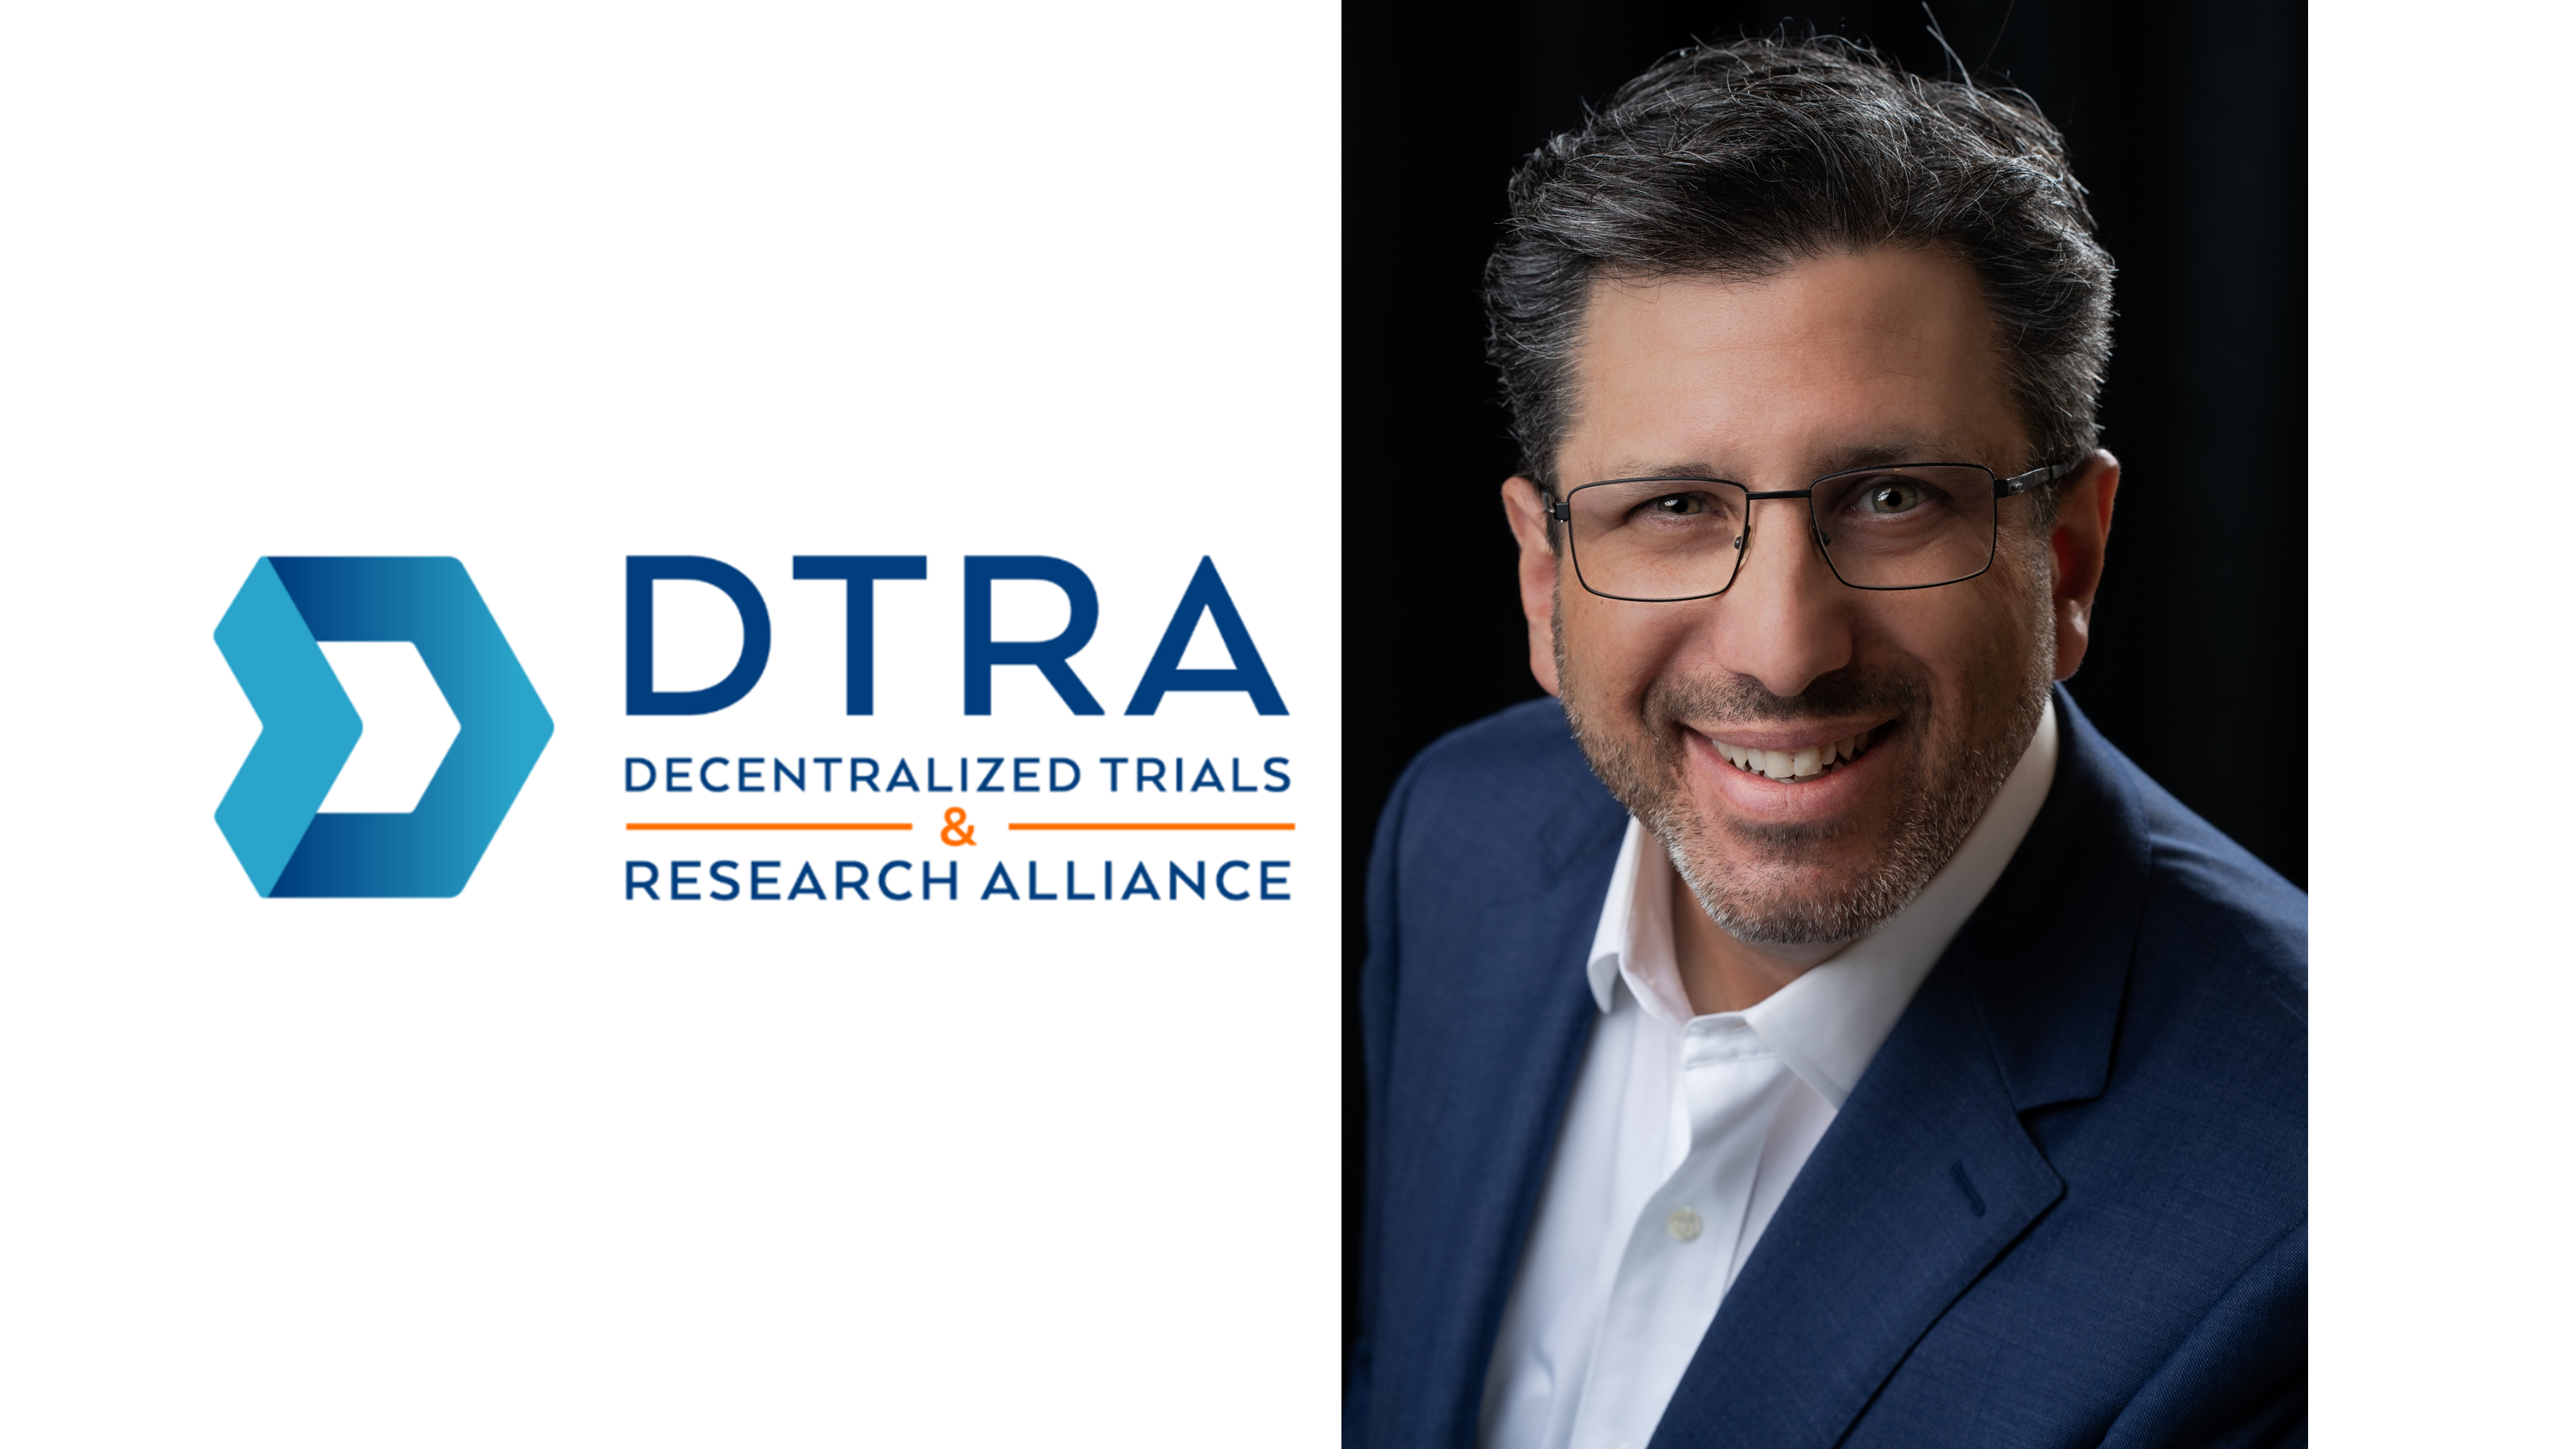 Craig Lipset, Co-Founder of the Decentralized Trials & Research Alliance